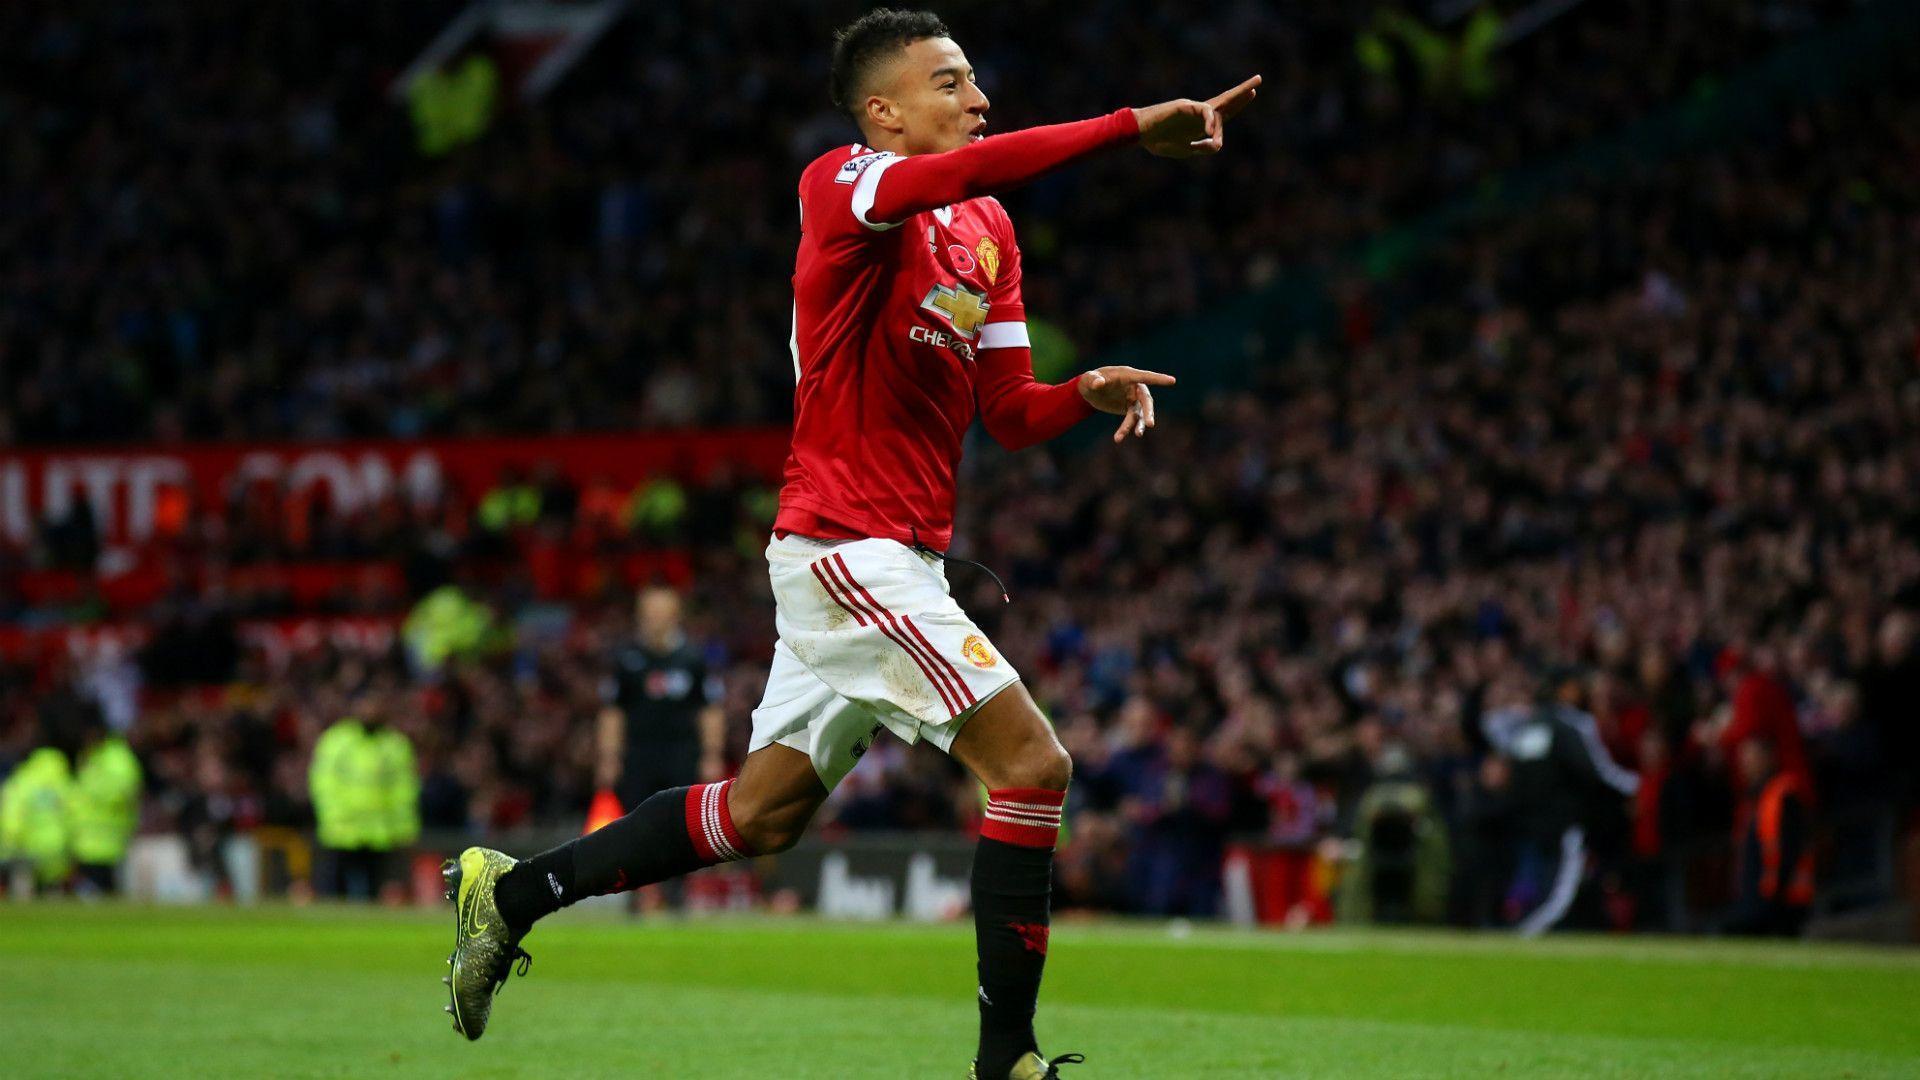 Martial replaces Rooney as the main man at Old Trafford: The best